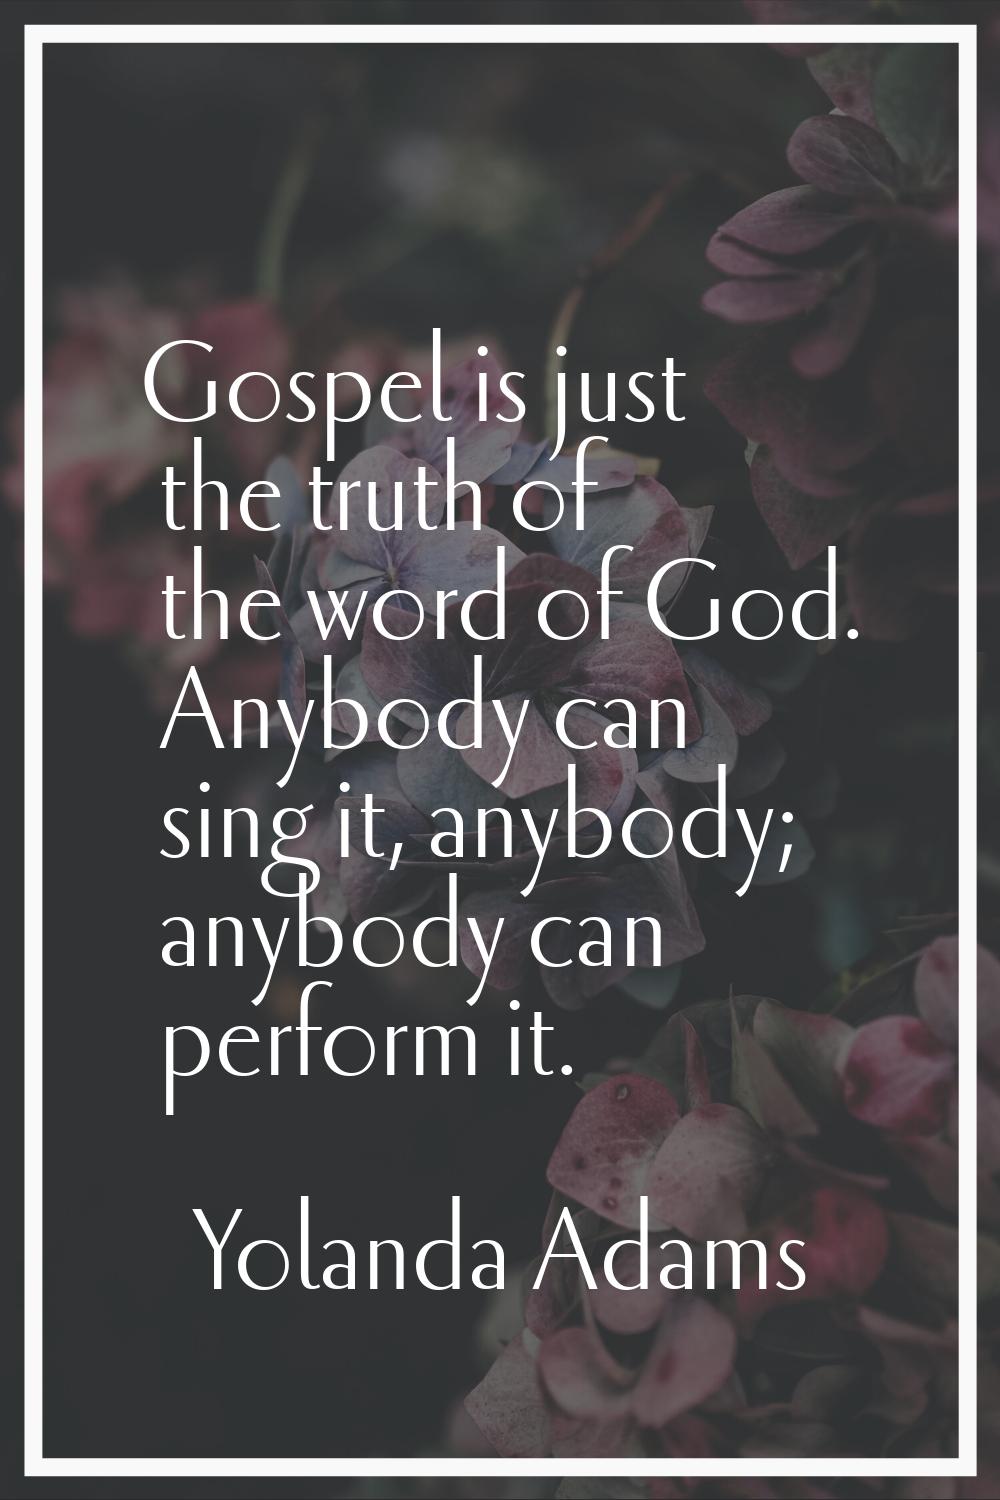 Gospel is just the truth of the word of God. Anybody can sing it, anybody; anybody can perform it.